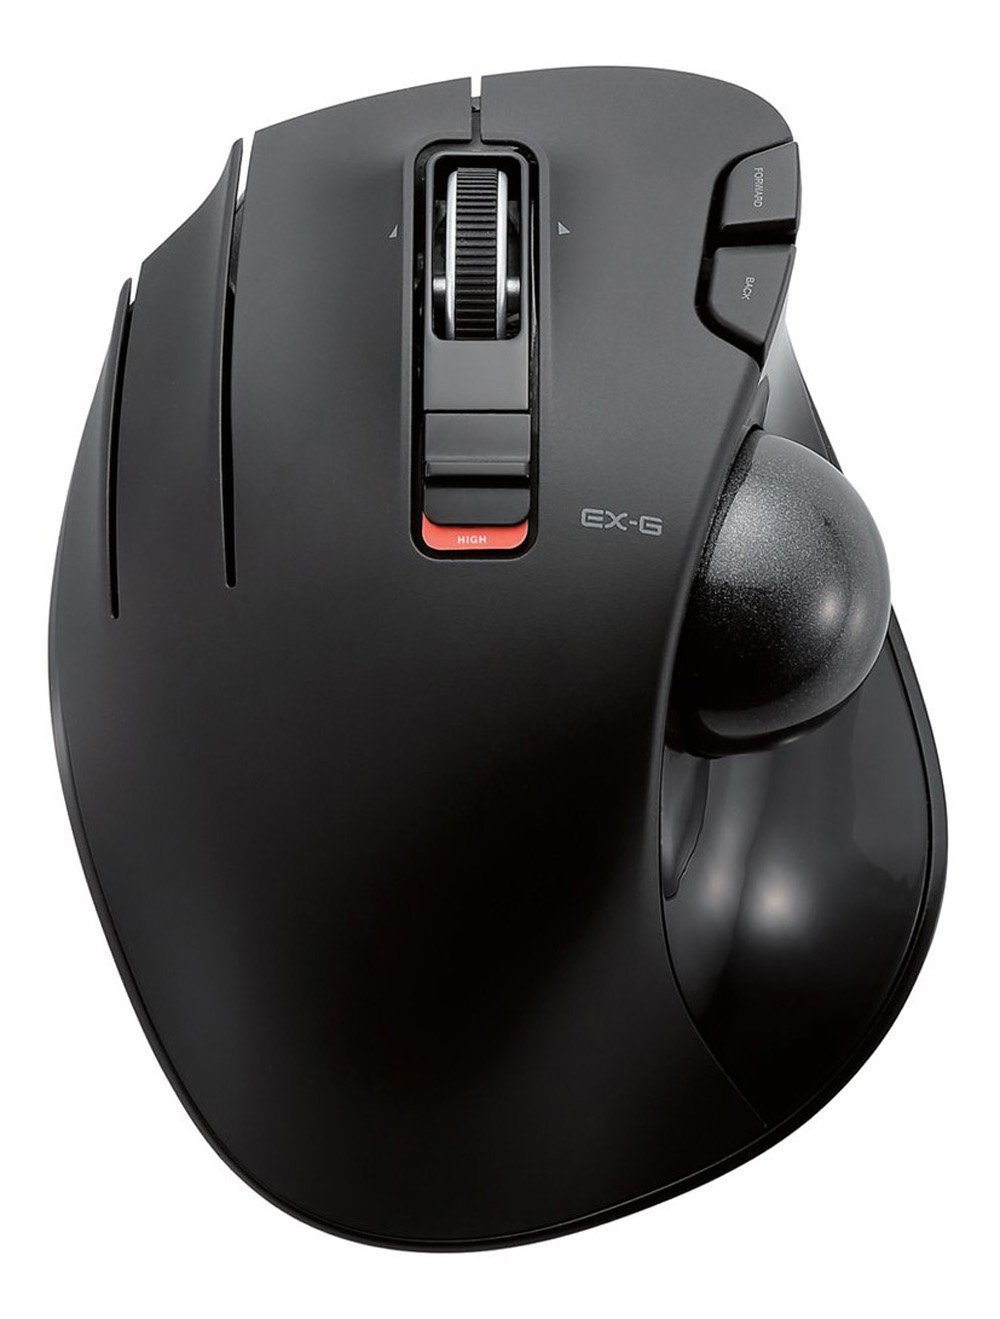 How To Find the Best Left-Handed Computer Mouse